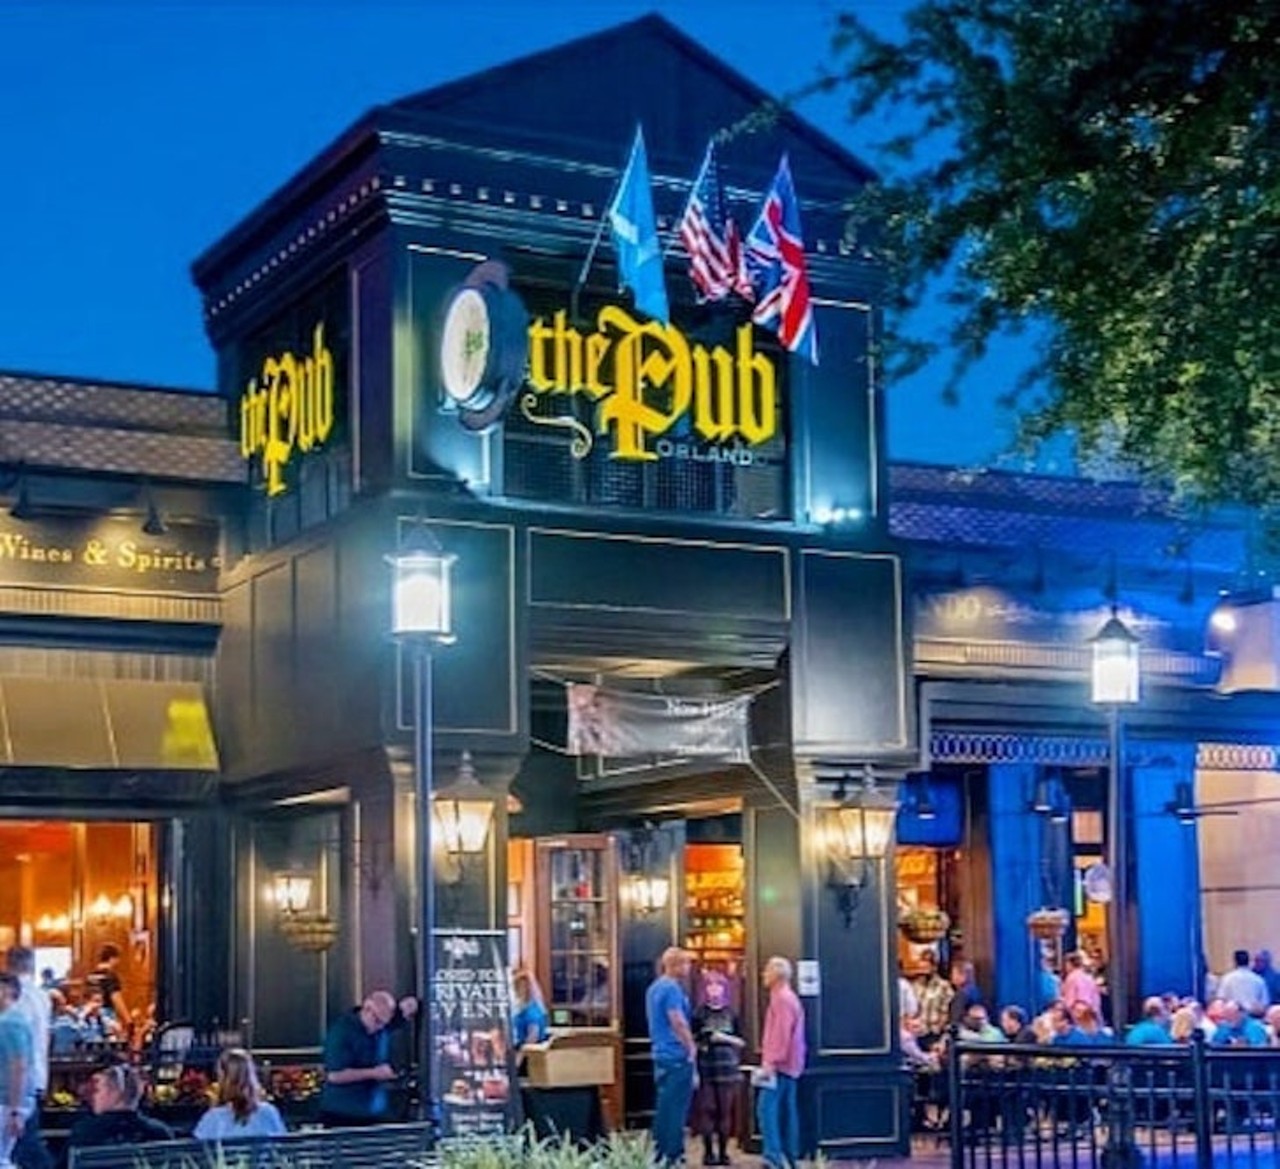 The Pub Orlando 
9101 International Drive, Florida 32819, 407-352-2305
Get a pint for carry out or delivery from The Pub Orlando. Open for limited indoor and outdoor seating as well as carryout and delivery.  
Photo via The Pub Orlando/Facebook